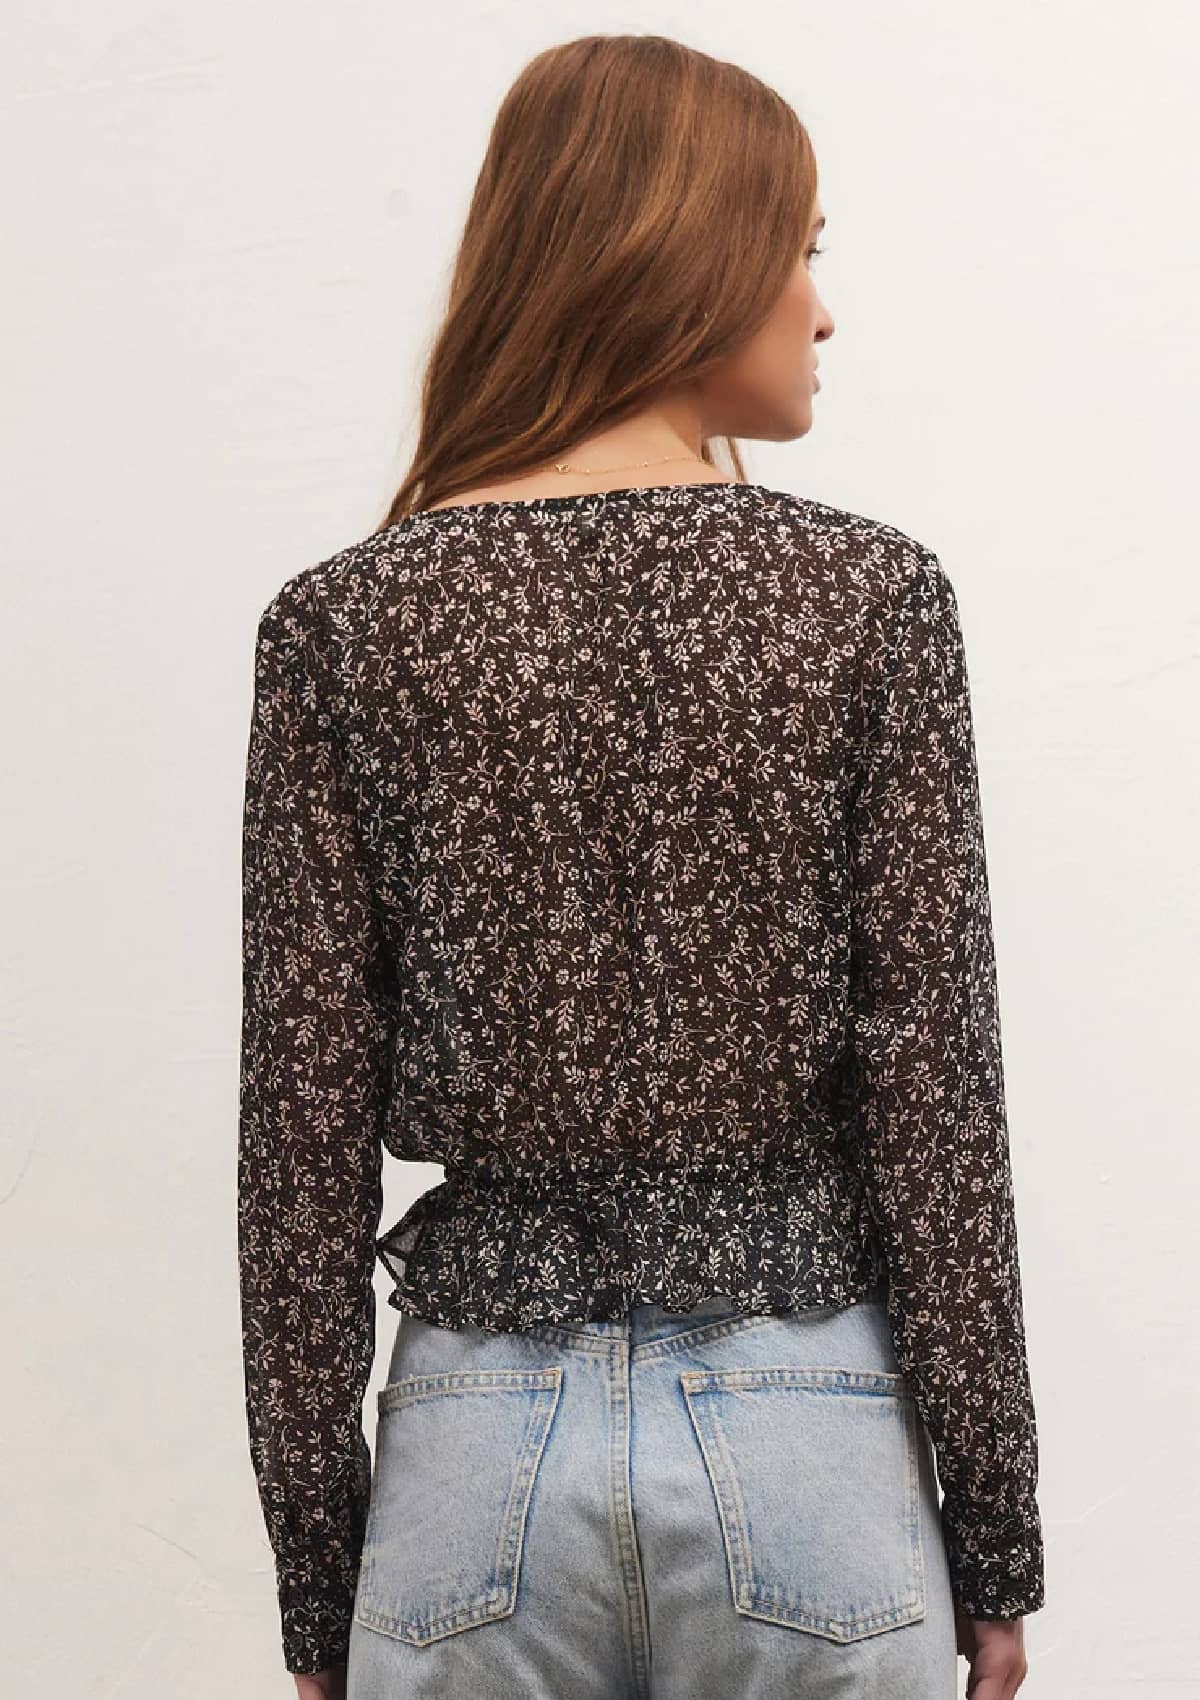 Holland Floral Top -Z SUPPLY- Ruby Jane-